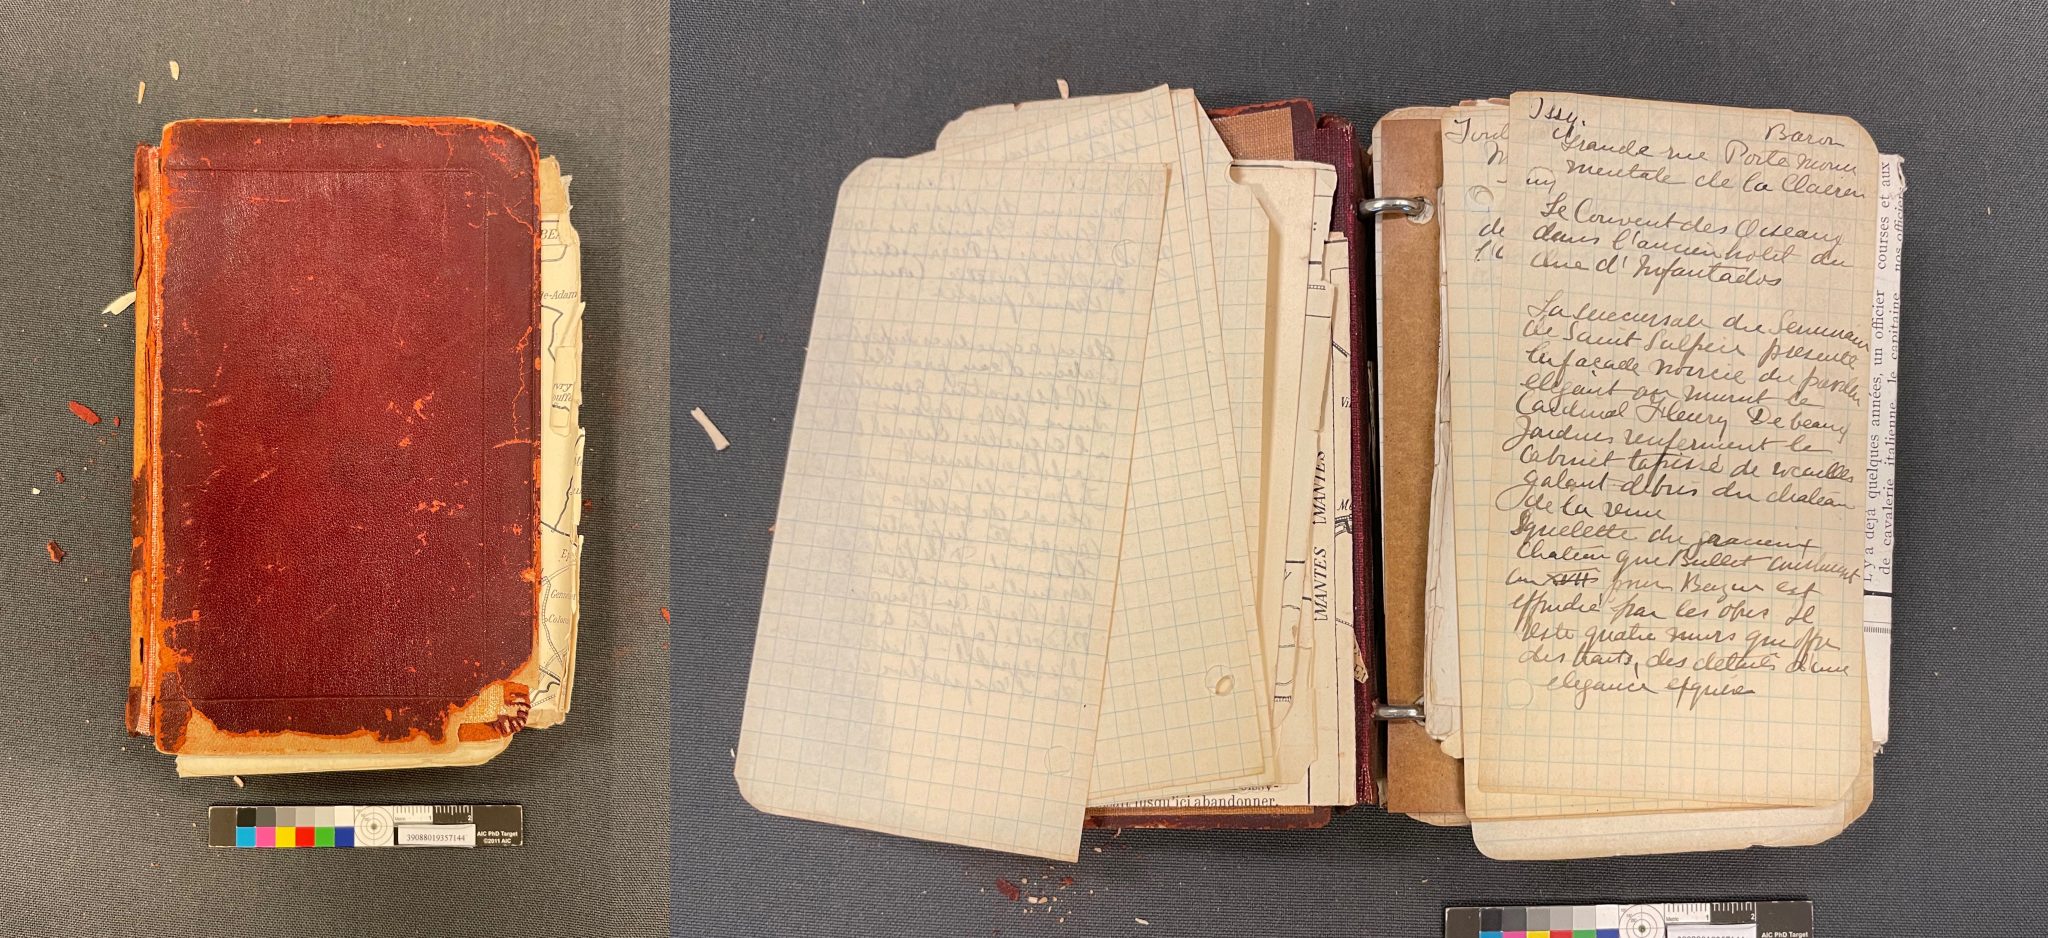 The Hewitt Sisters’ Diaries: Conservation and Digitization Behind-the-Scenes